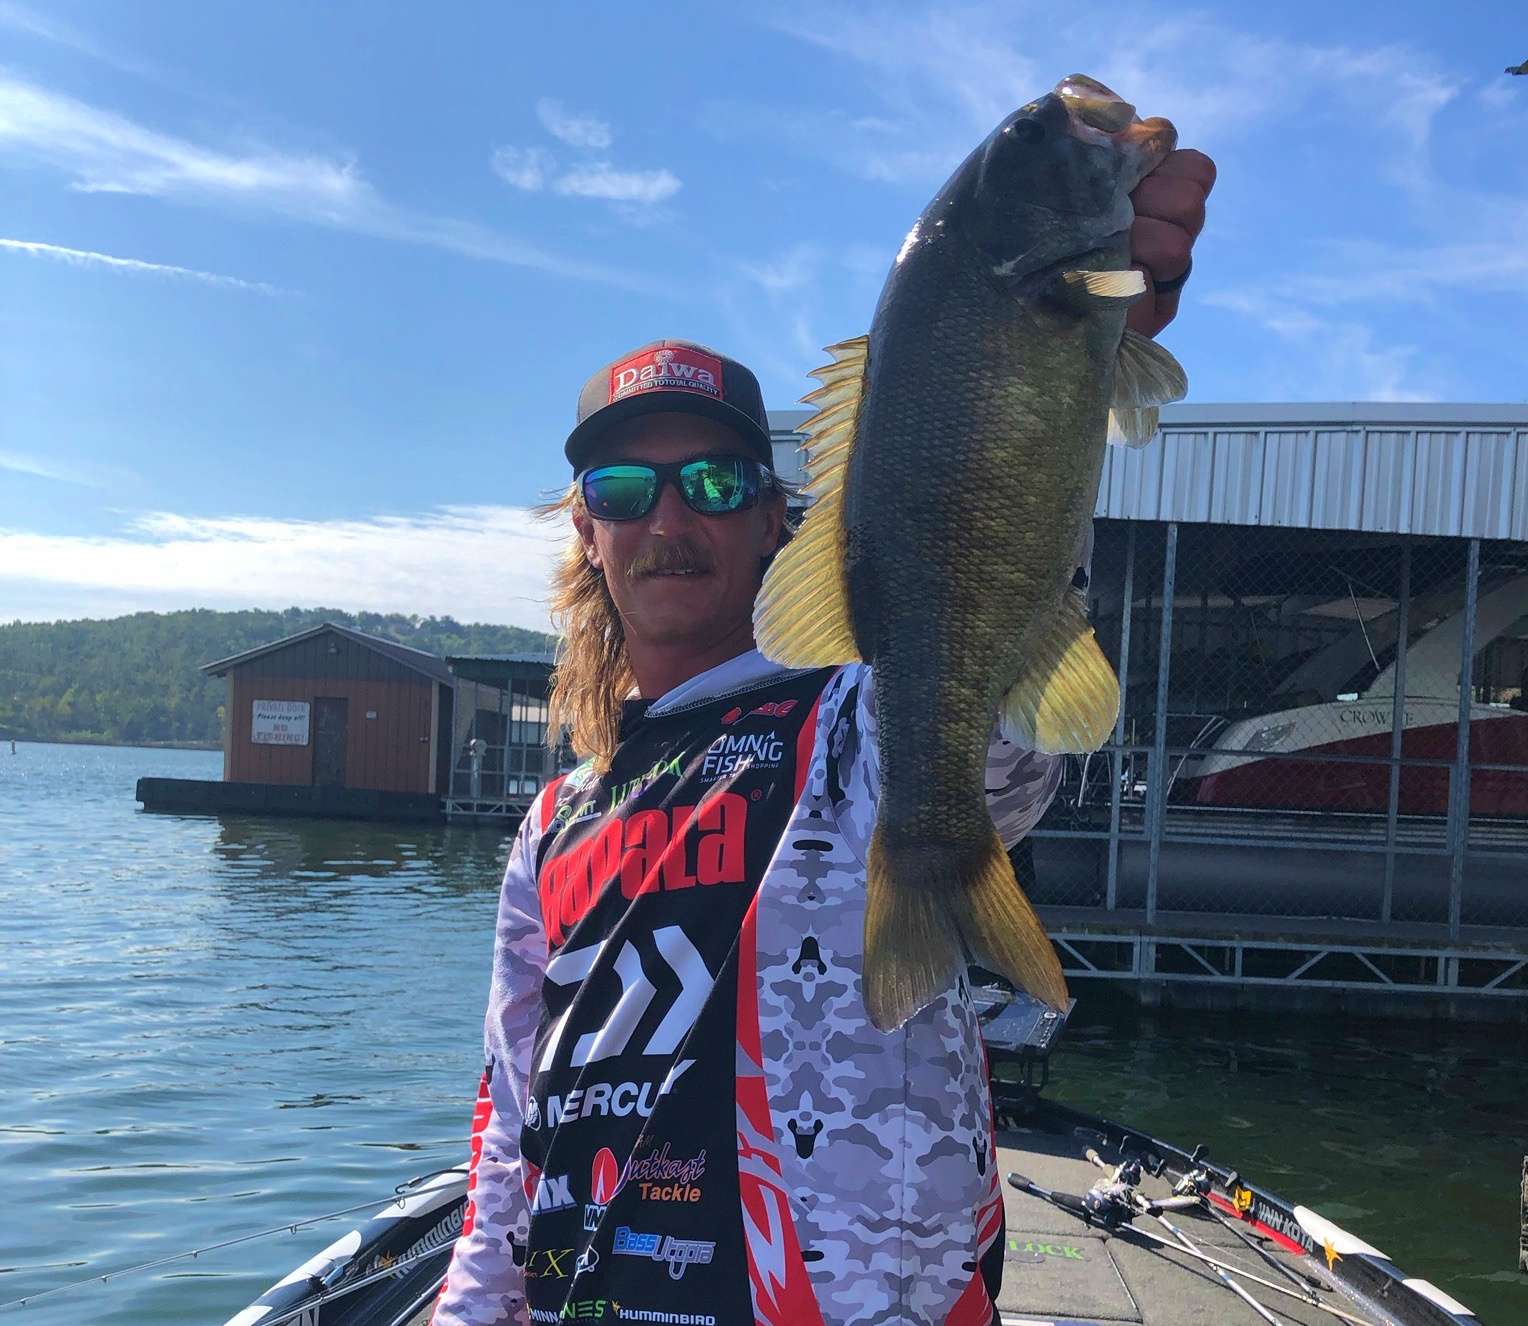 Seth doing what Seth does best! 2-8 smallie.